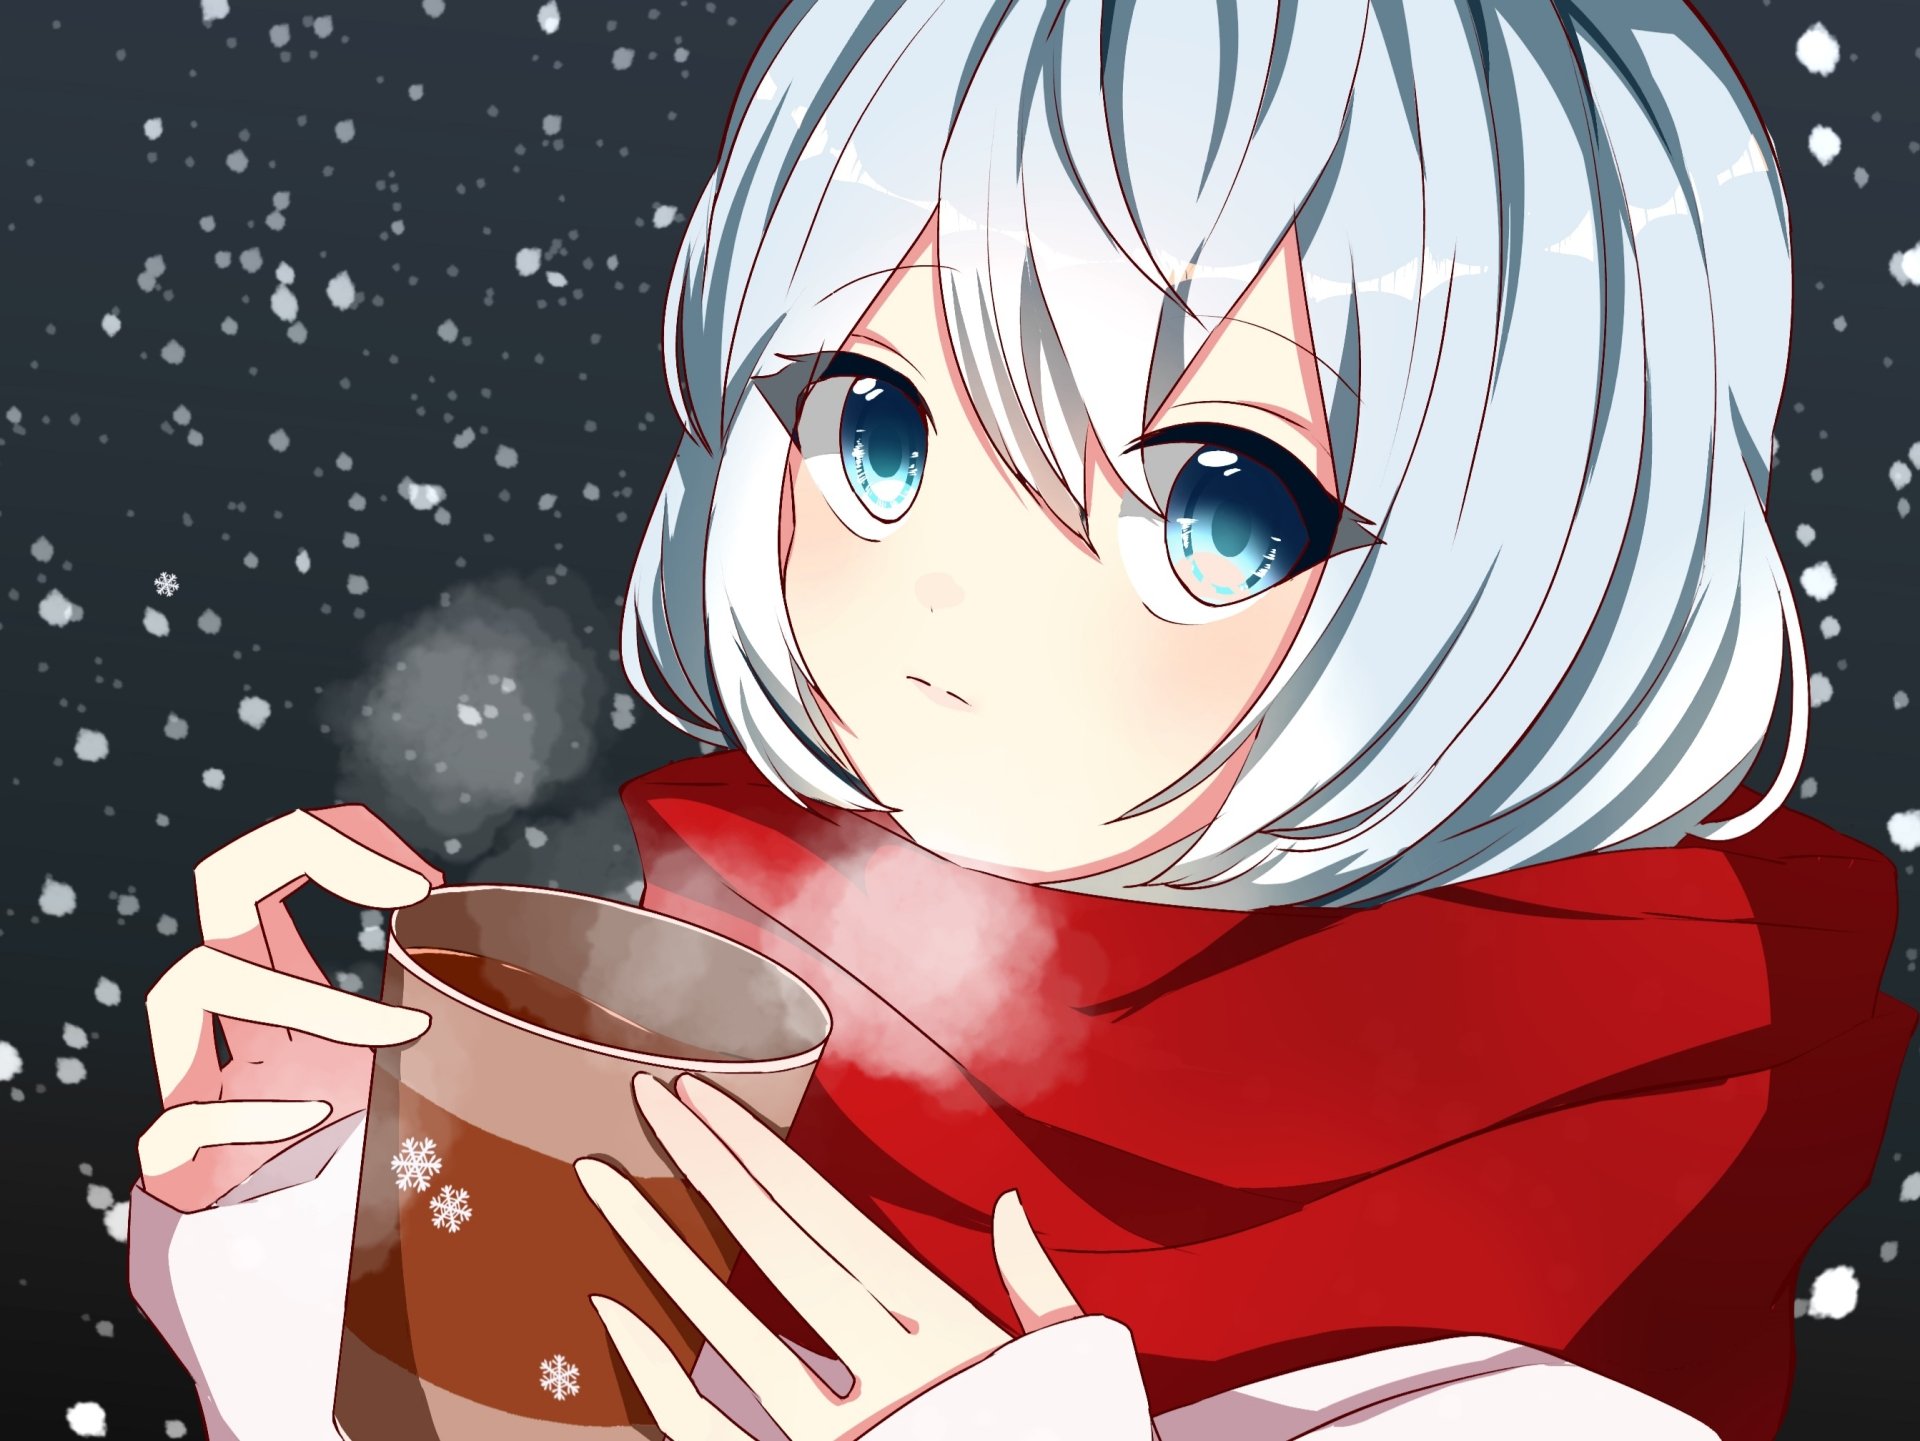 2686x2016 Anime girl drinking hot chocolate on a cold snowy night by 萌 Wall...